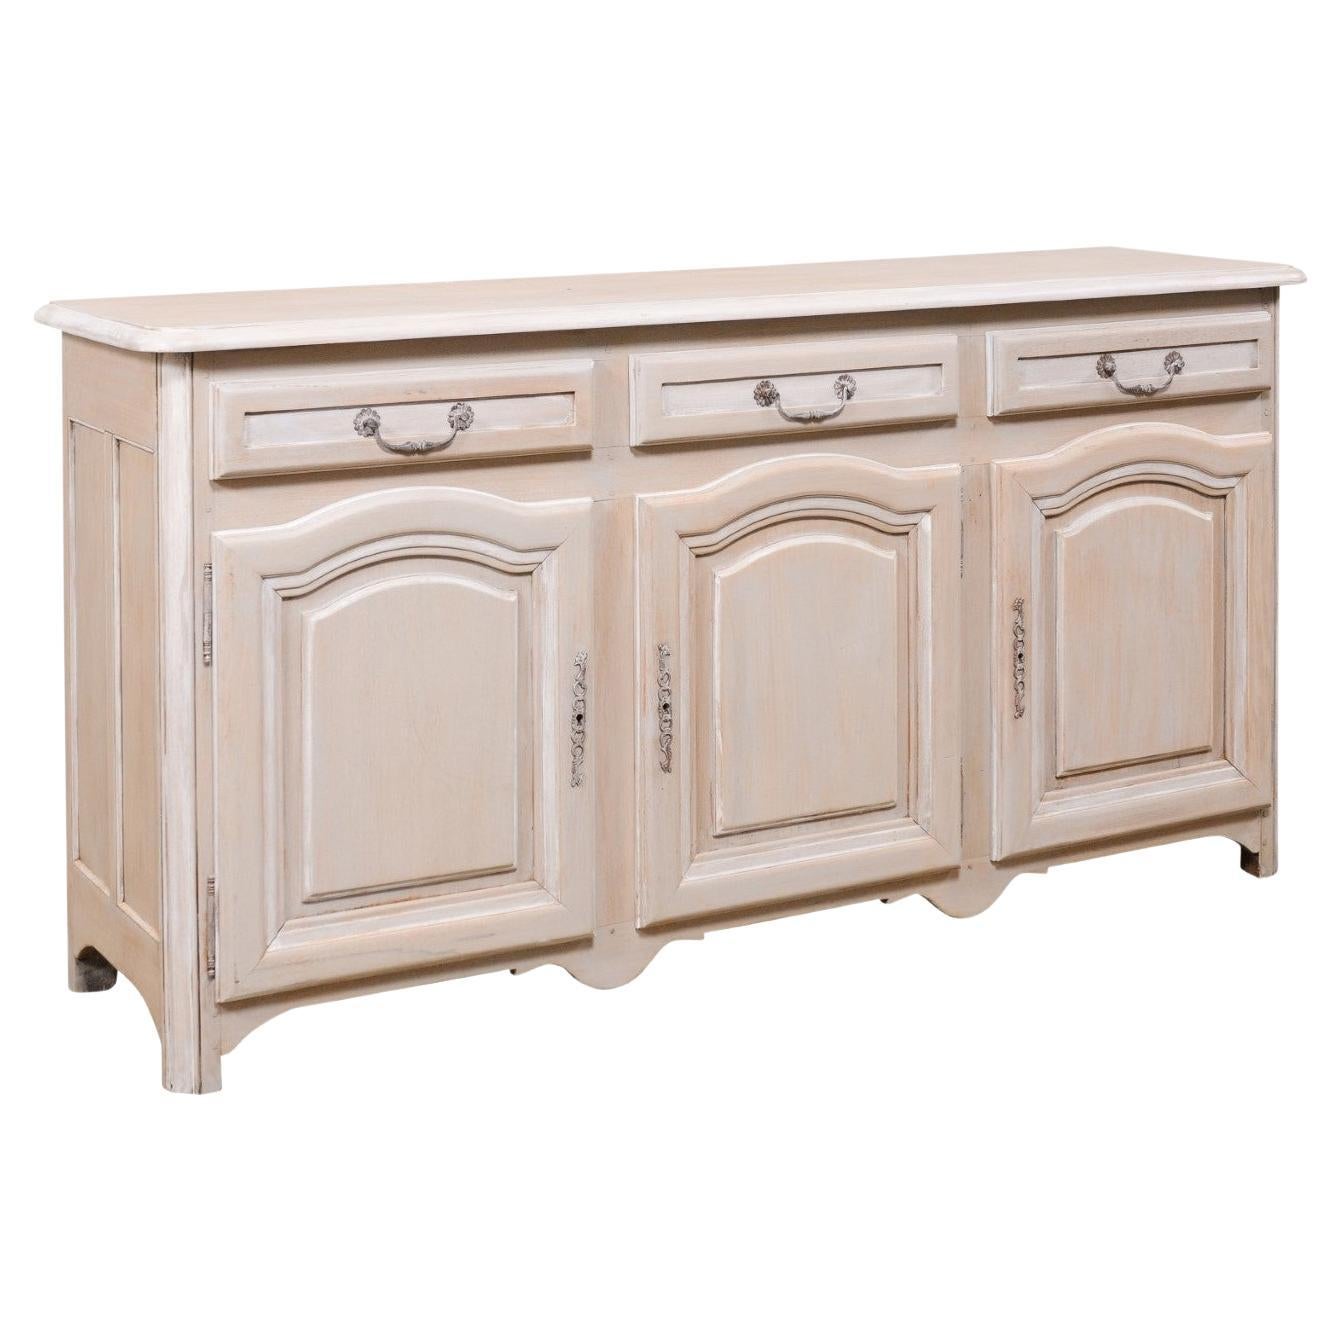 French Painted Credenza Console W/Drawers & Arched Panel Doors, Mid-20th Century For Sale